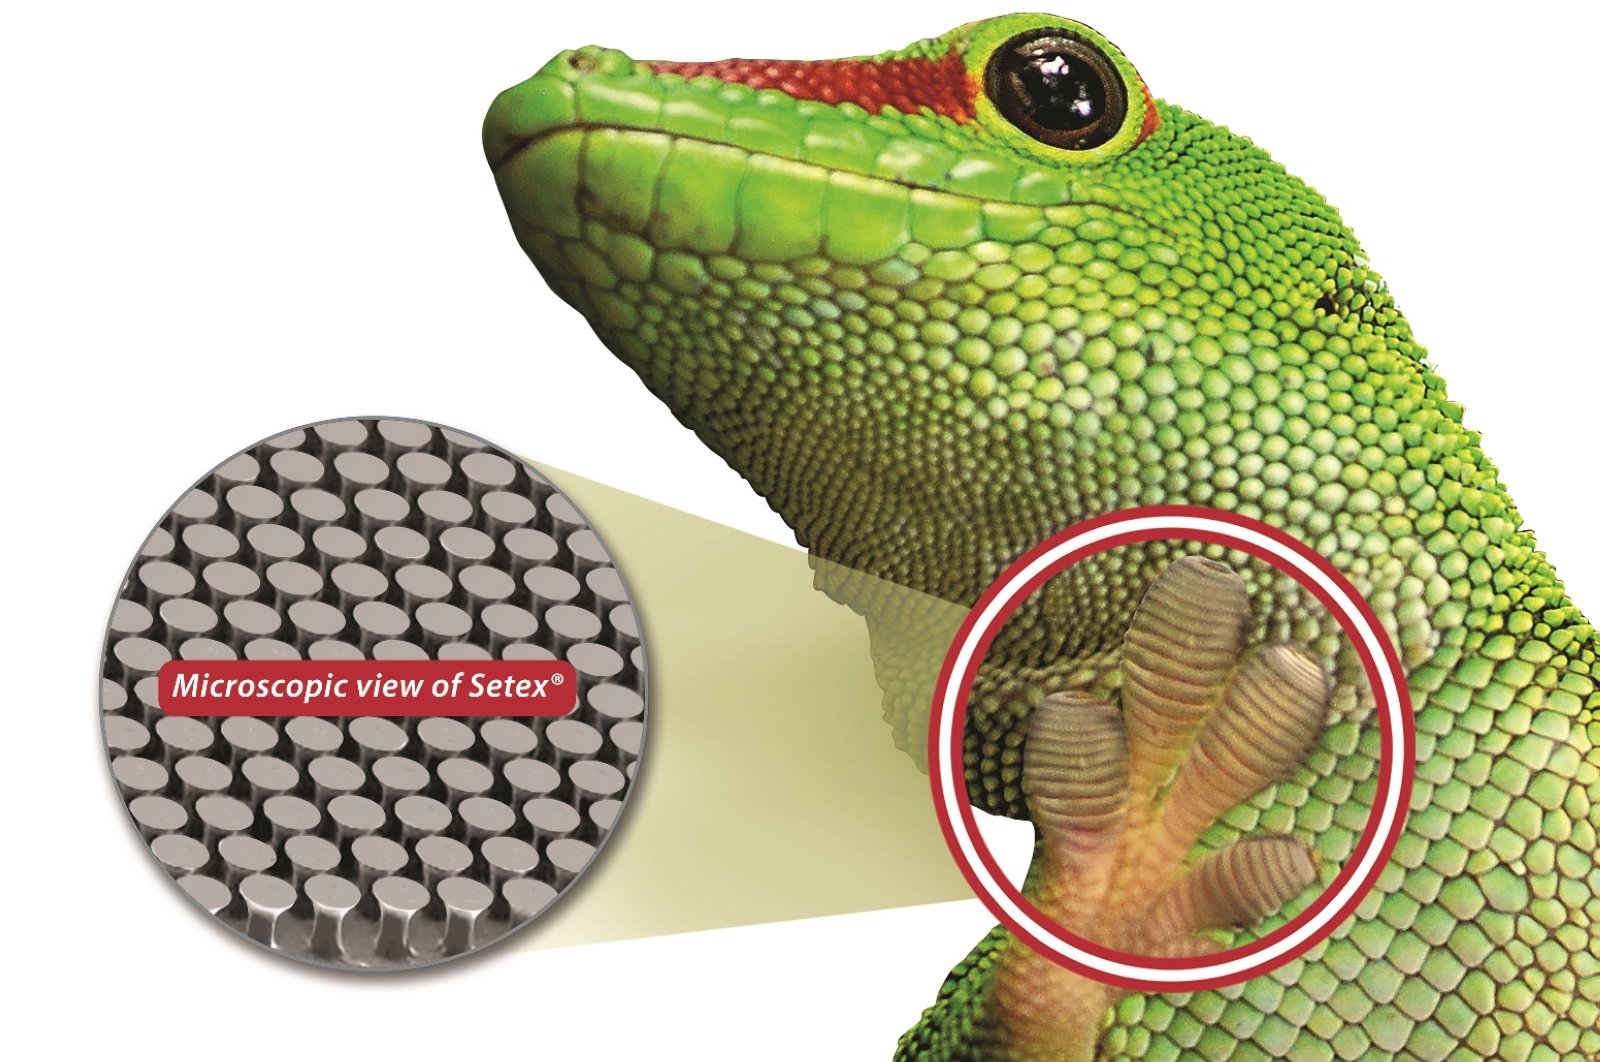 nanoGriptech is the first commercial manufacturer of gecko-inspired micro-structured dry adhesive ad surfaces for a wide range of applications.